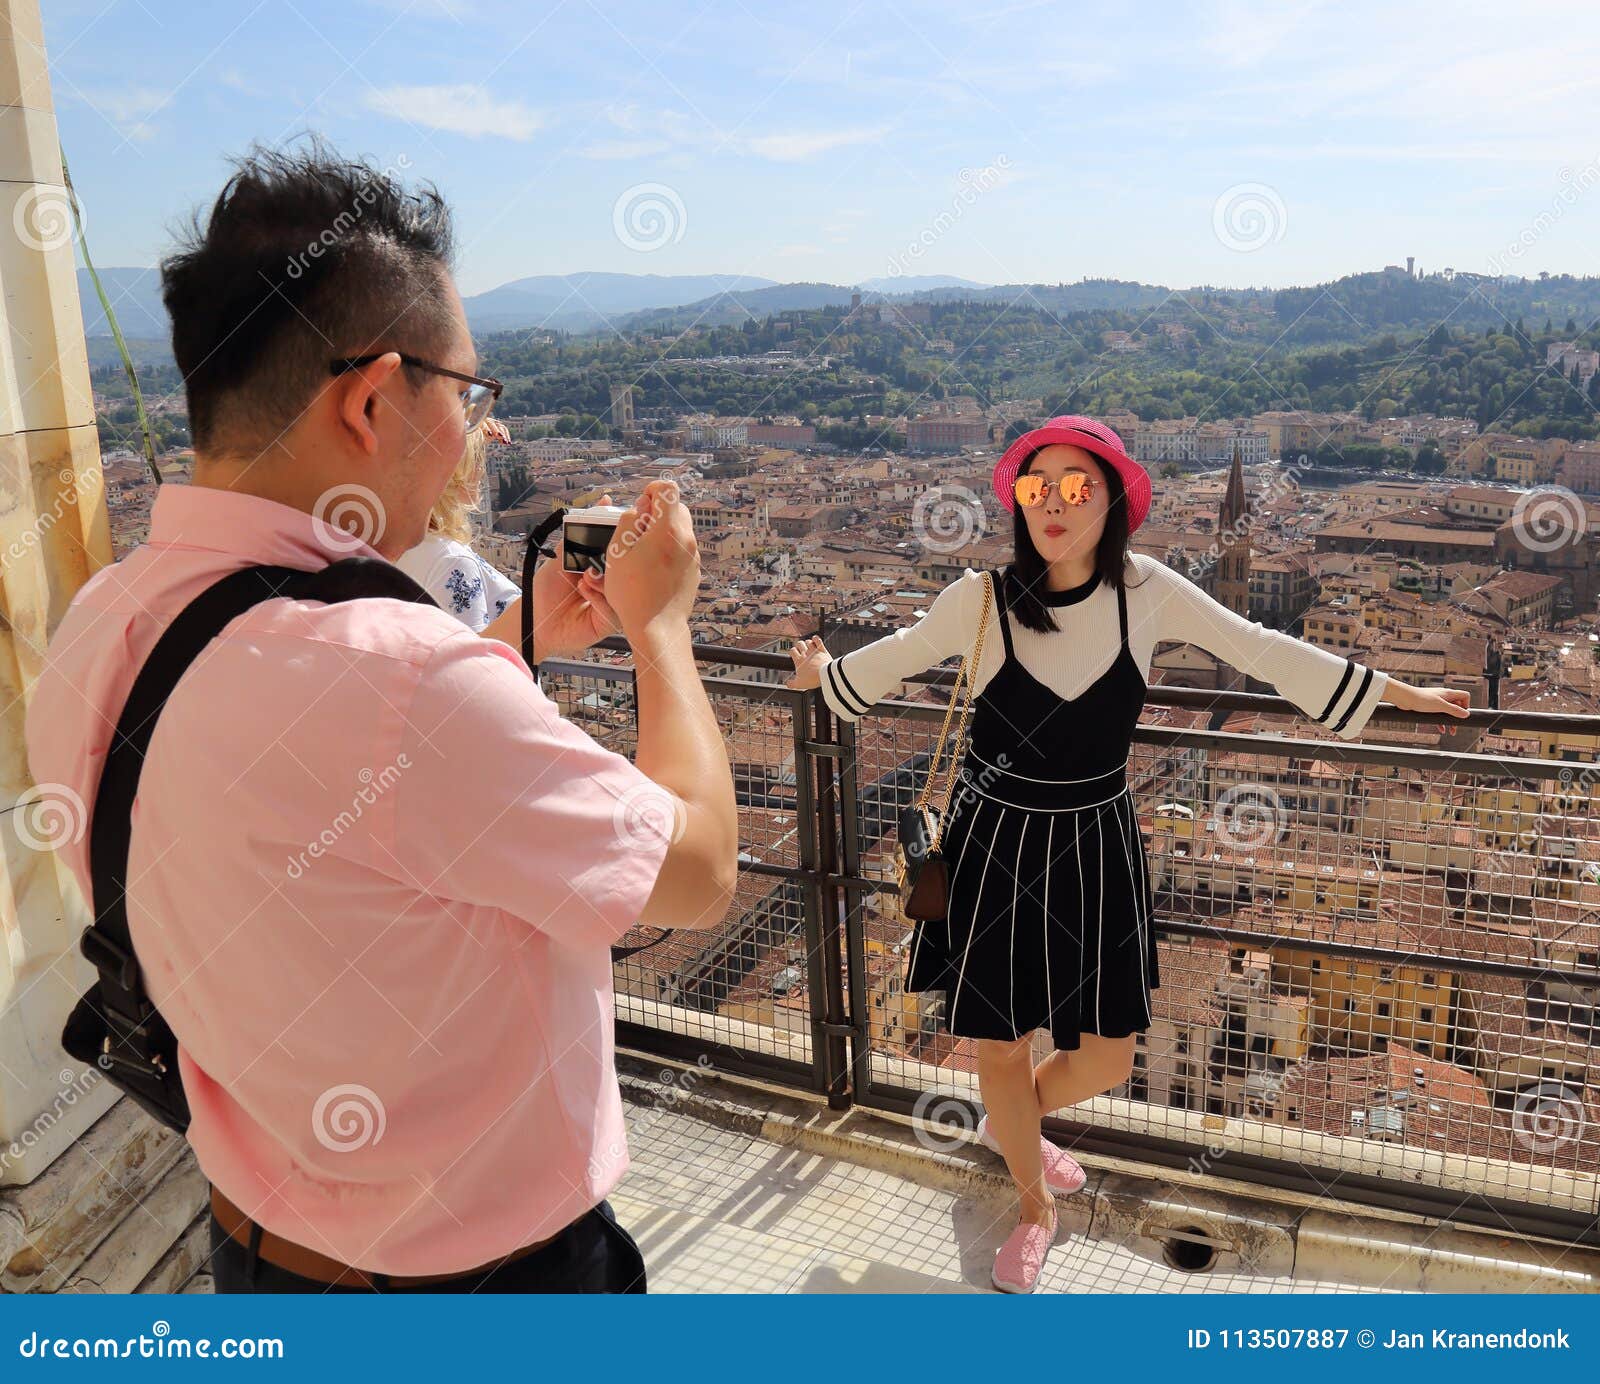 Tourists on the Cathedral Dome in Florence, Italy Editorial Photography ...